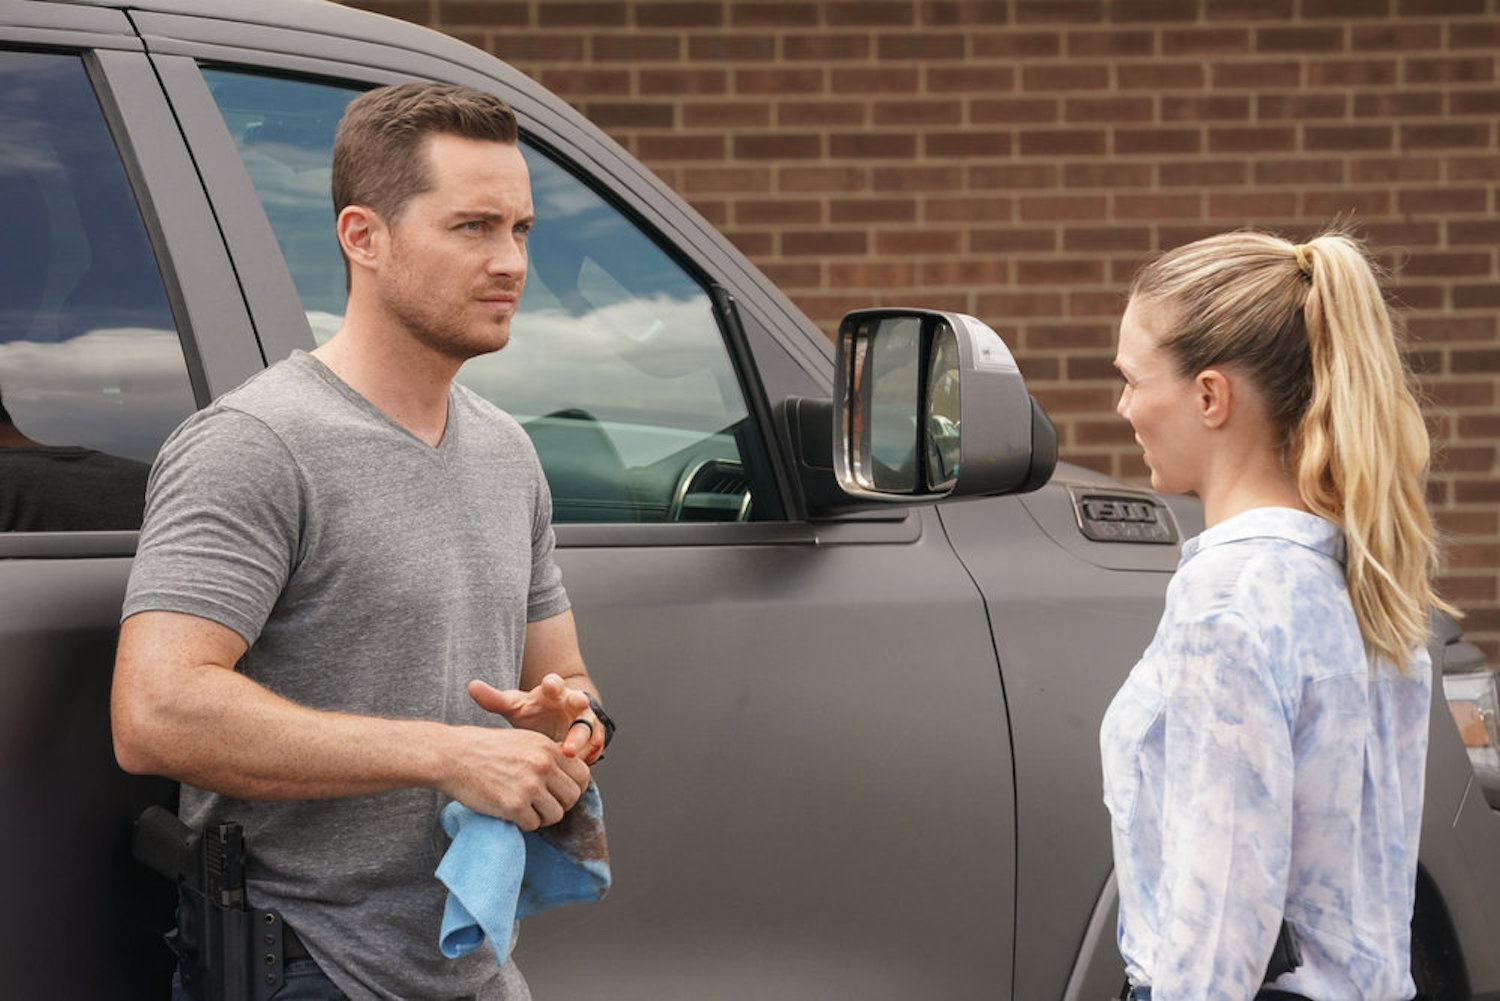 Jay Halstead and Hailey Upton speaking in 'Chicago P.D.'